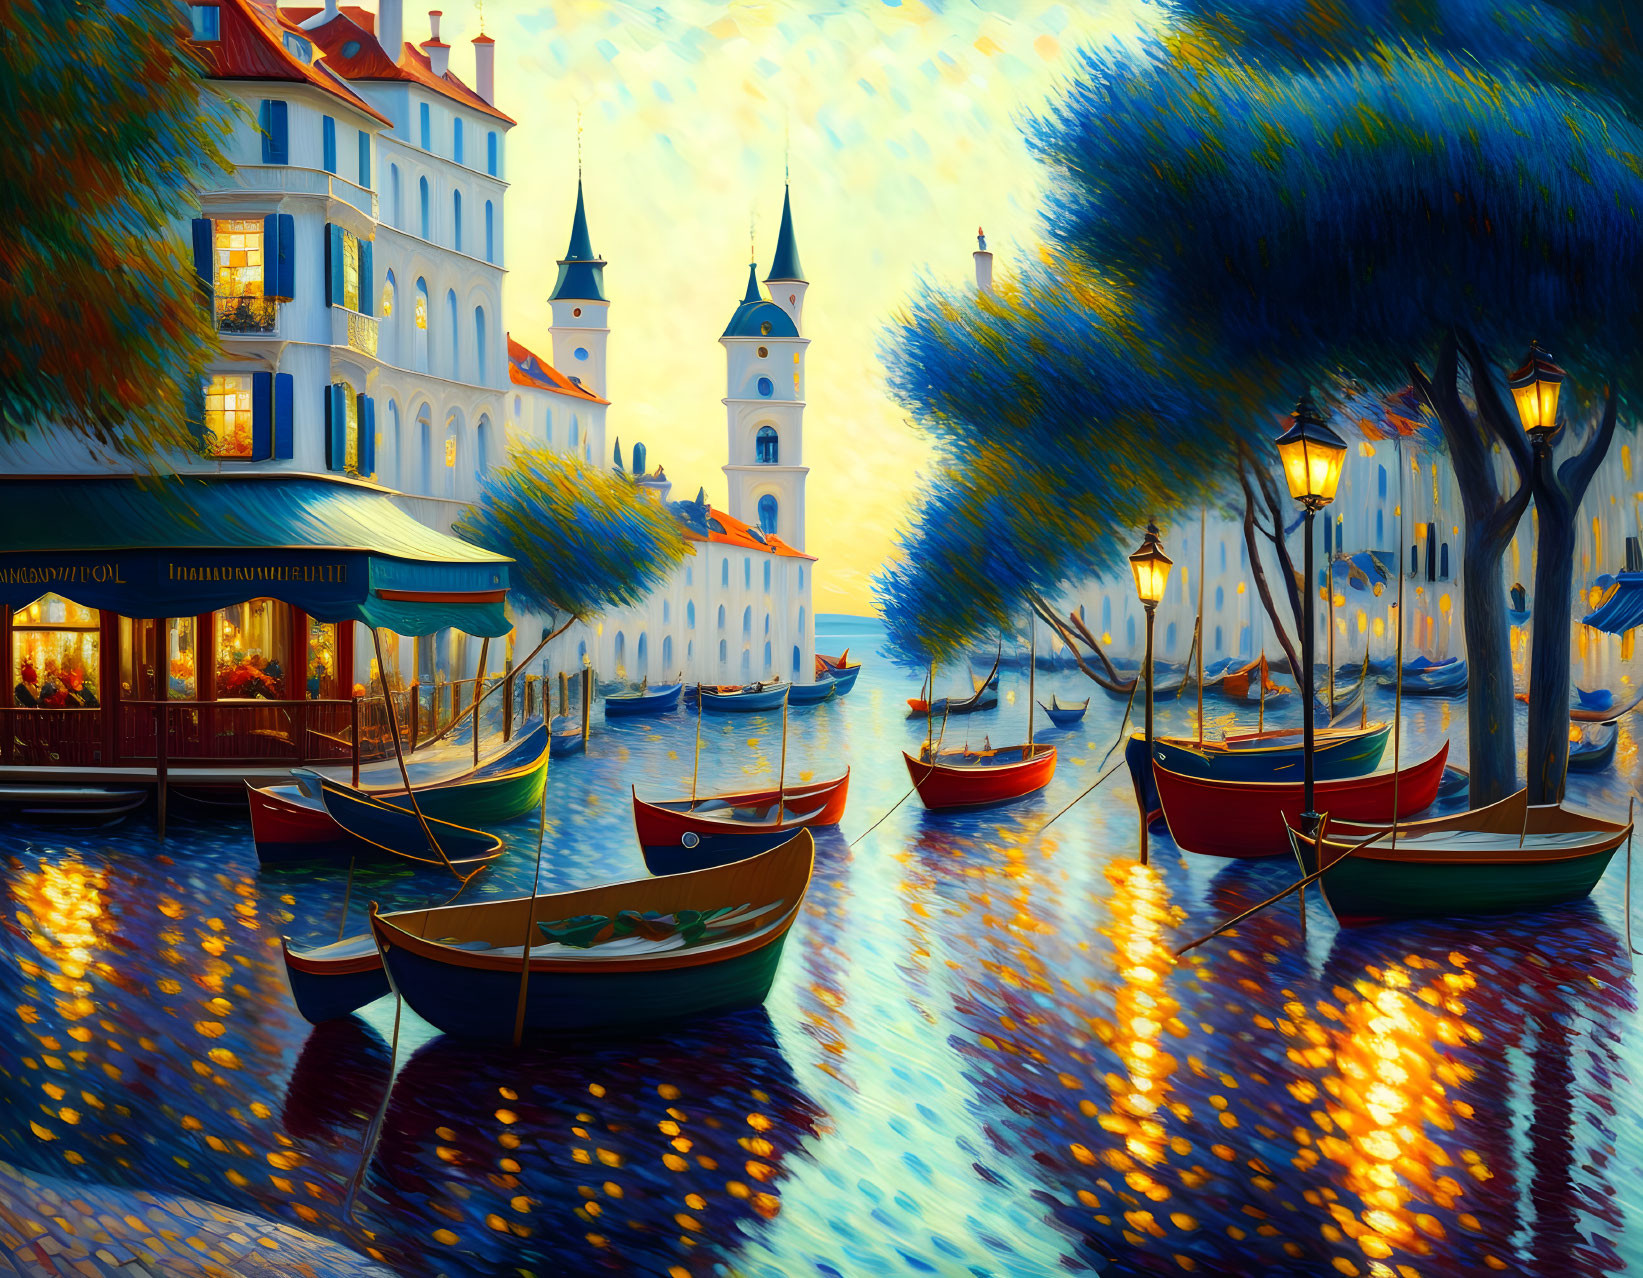 Colorful coastal town painting with boats, cobblestone paths, lit buildings, street lamps, and